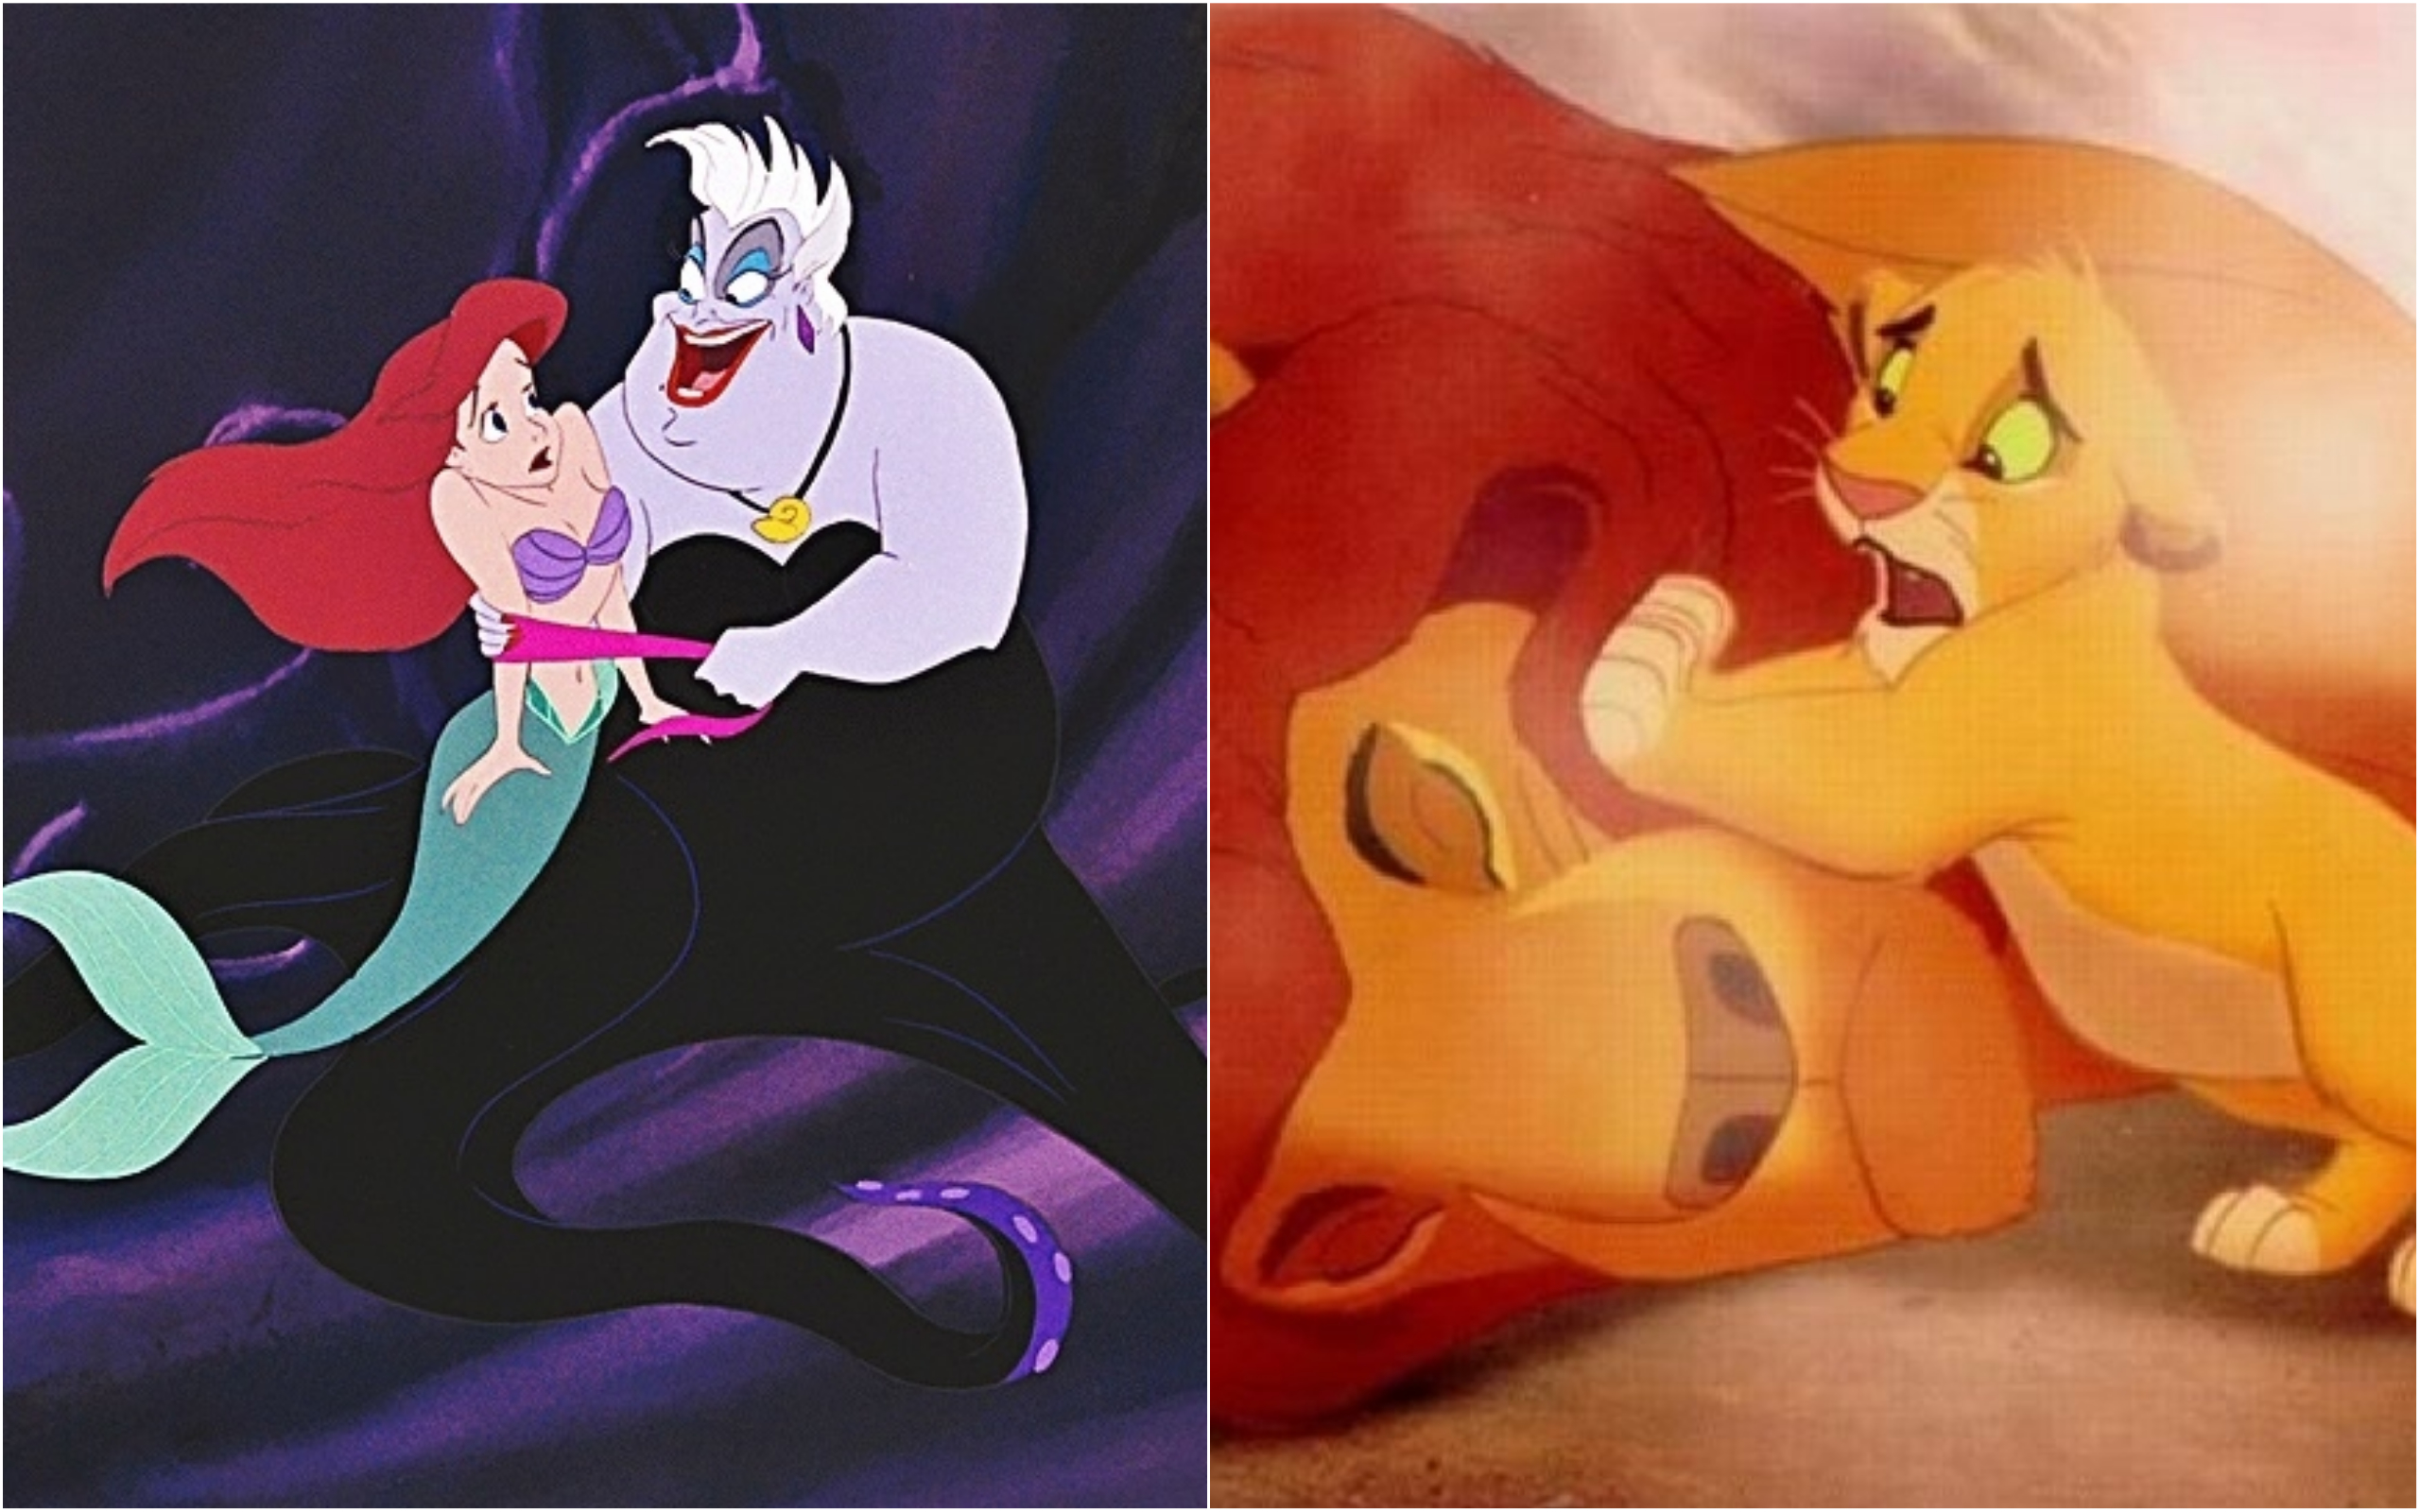 Disney Movies Ranked from Least to Most Childhood-Ruining